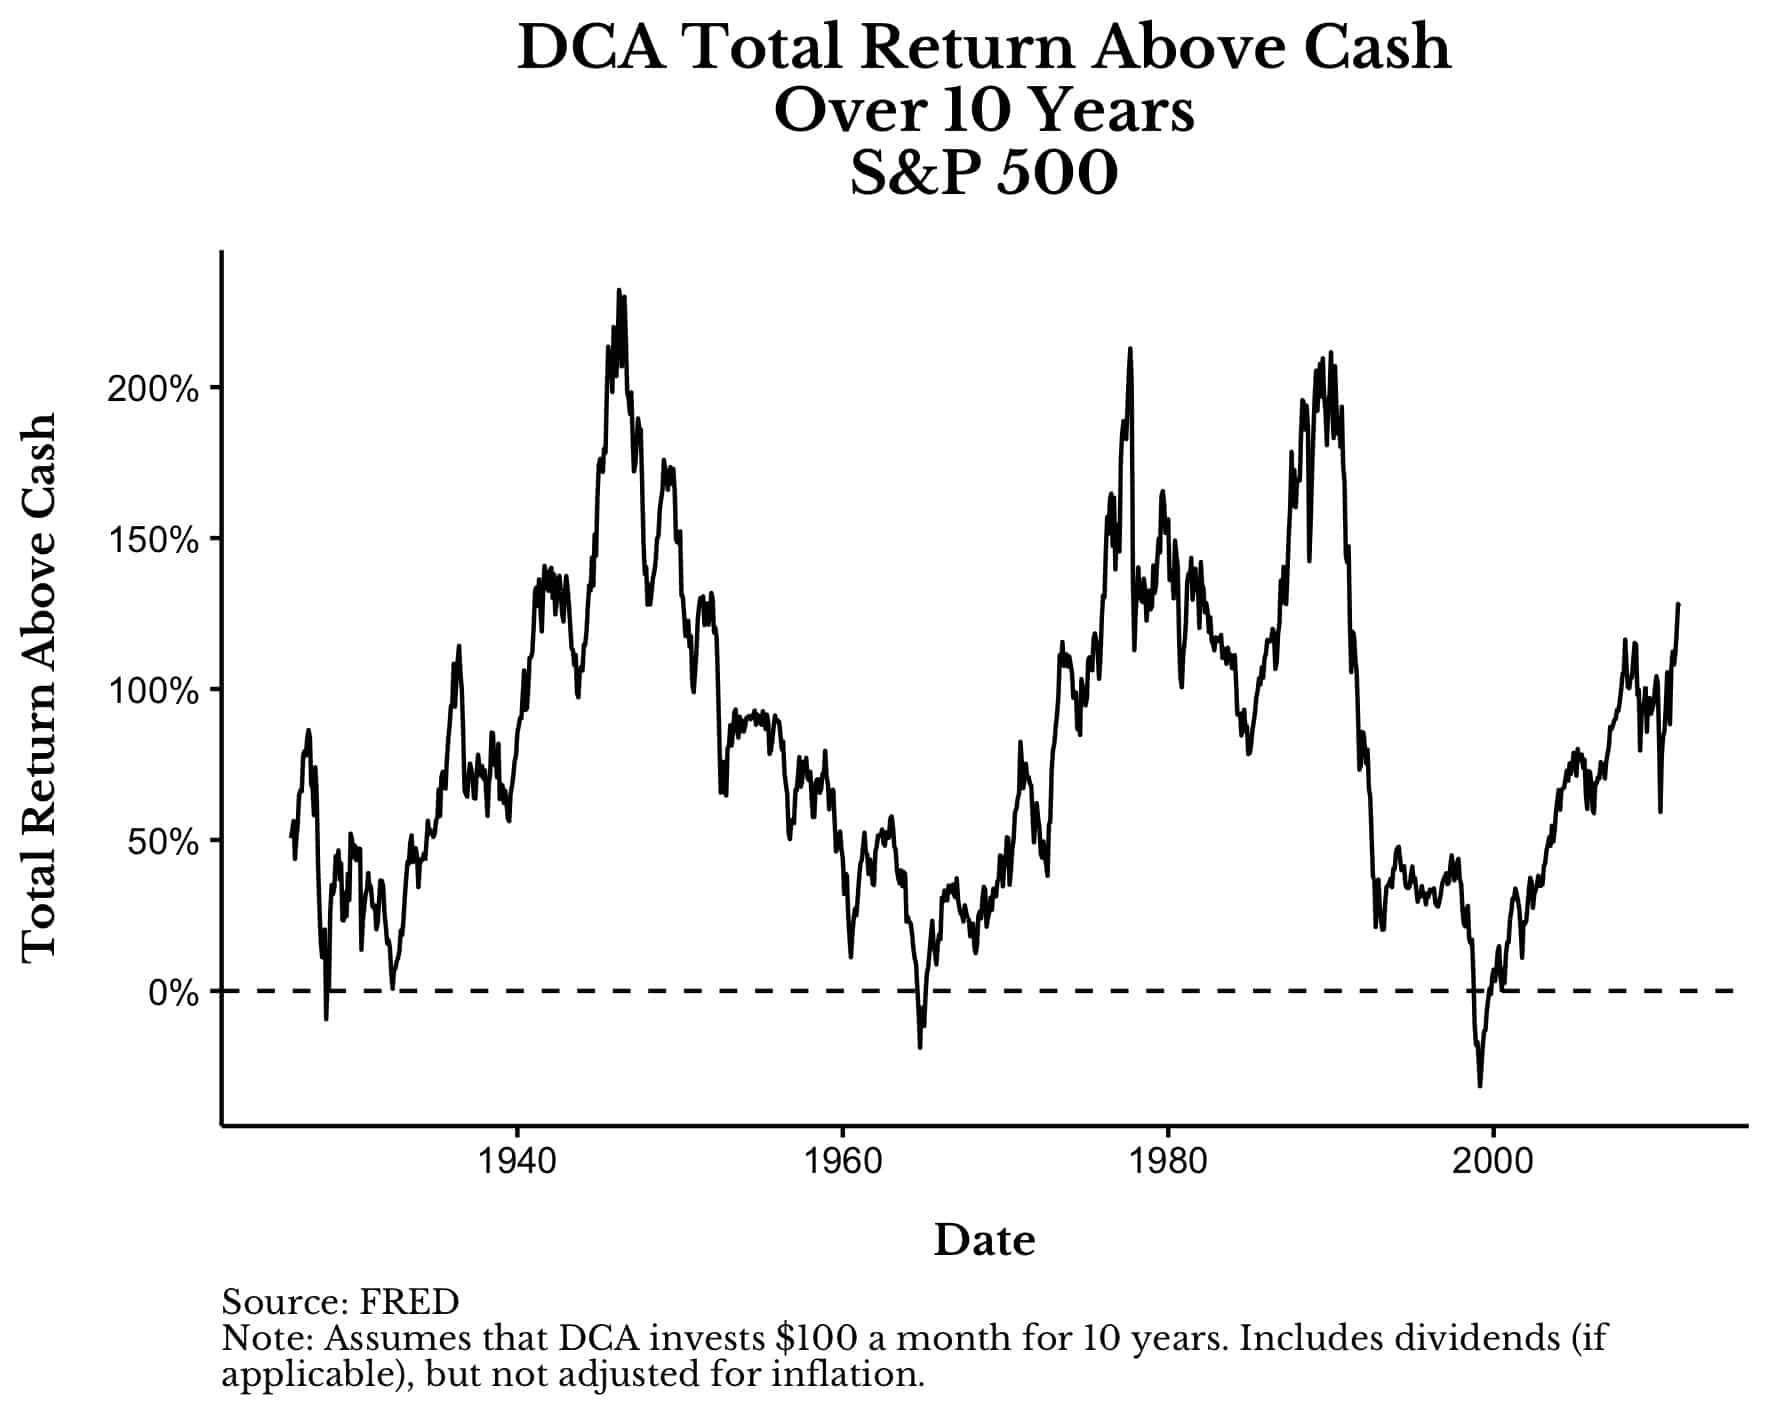 DCA into S&P 500 total return above cash over rolling 10 year periods